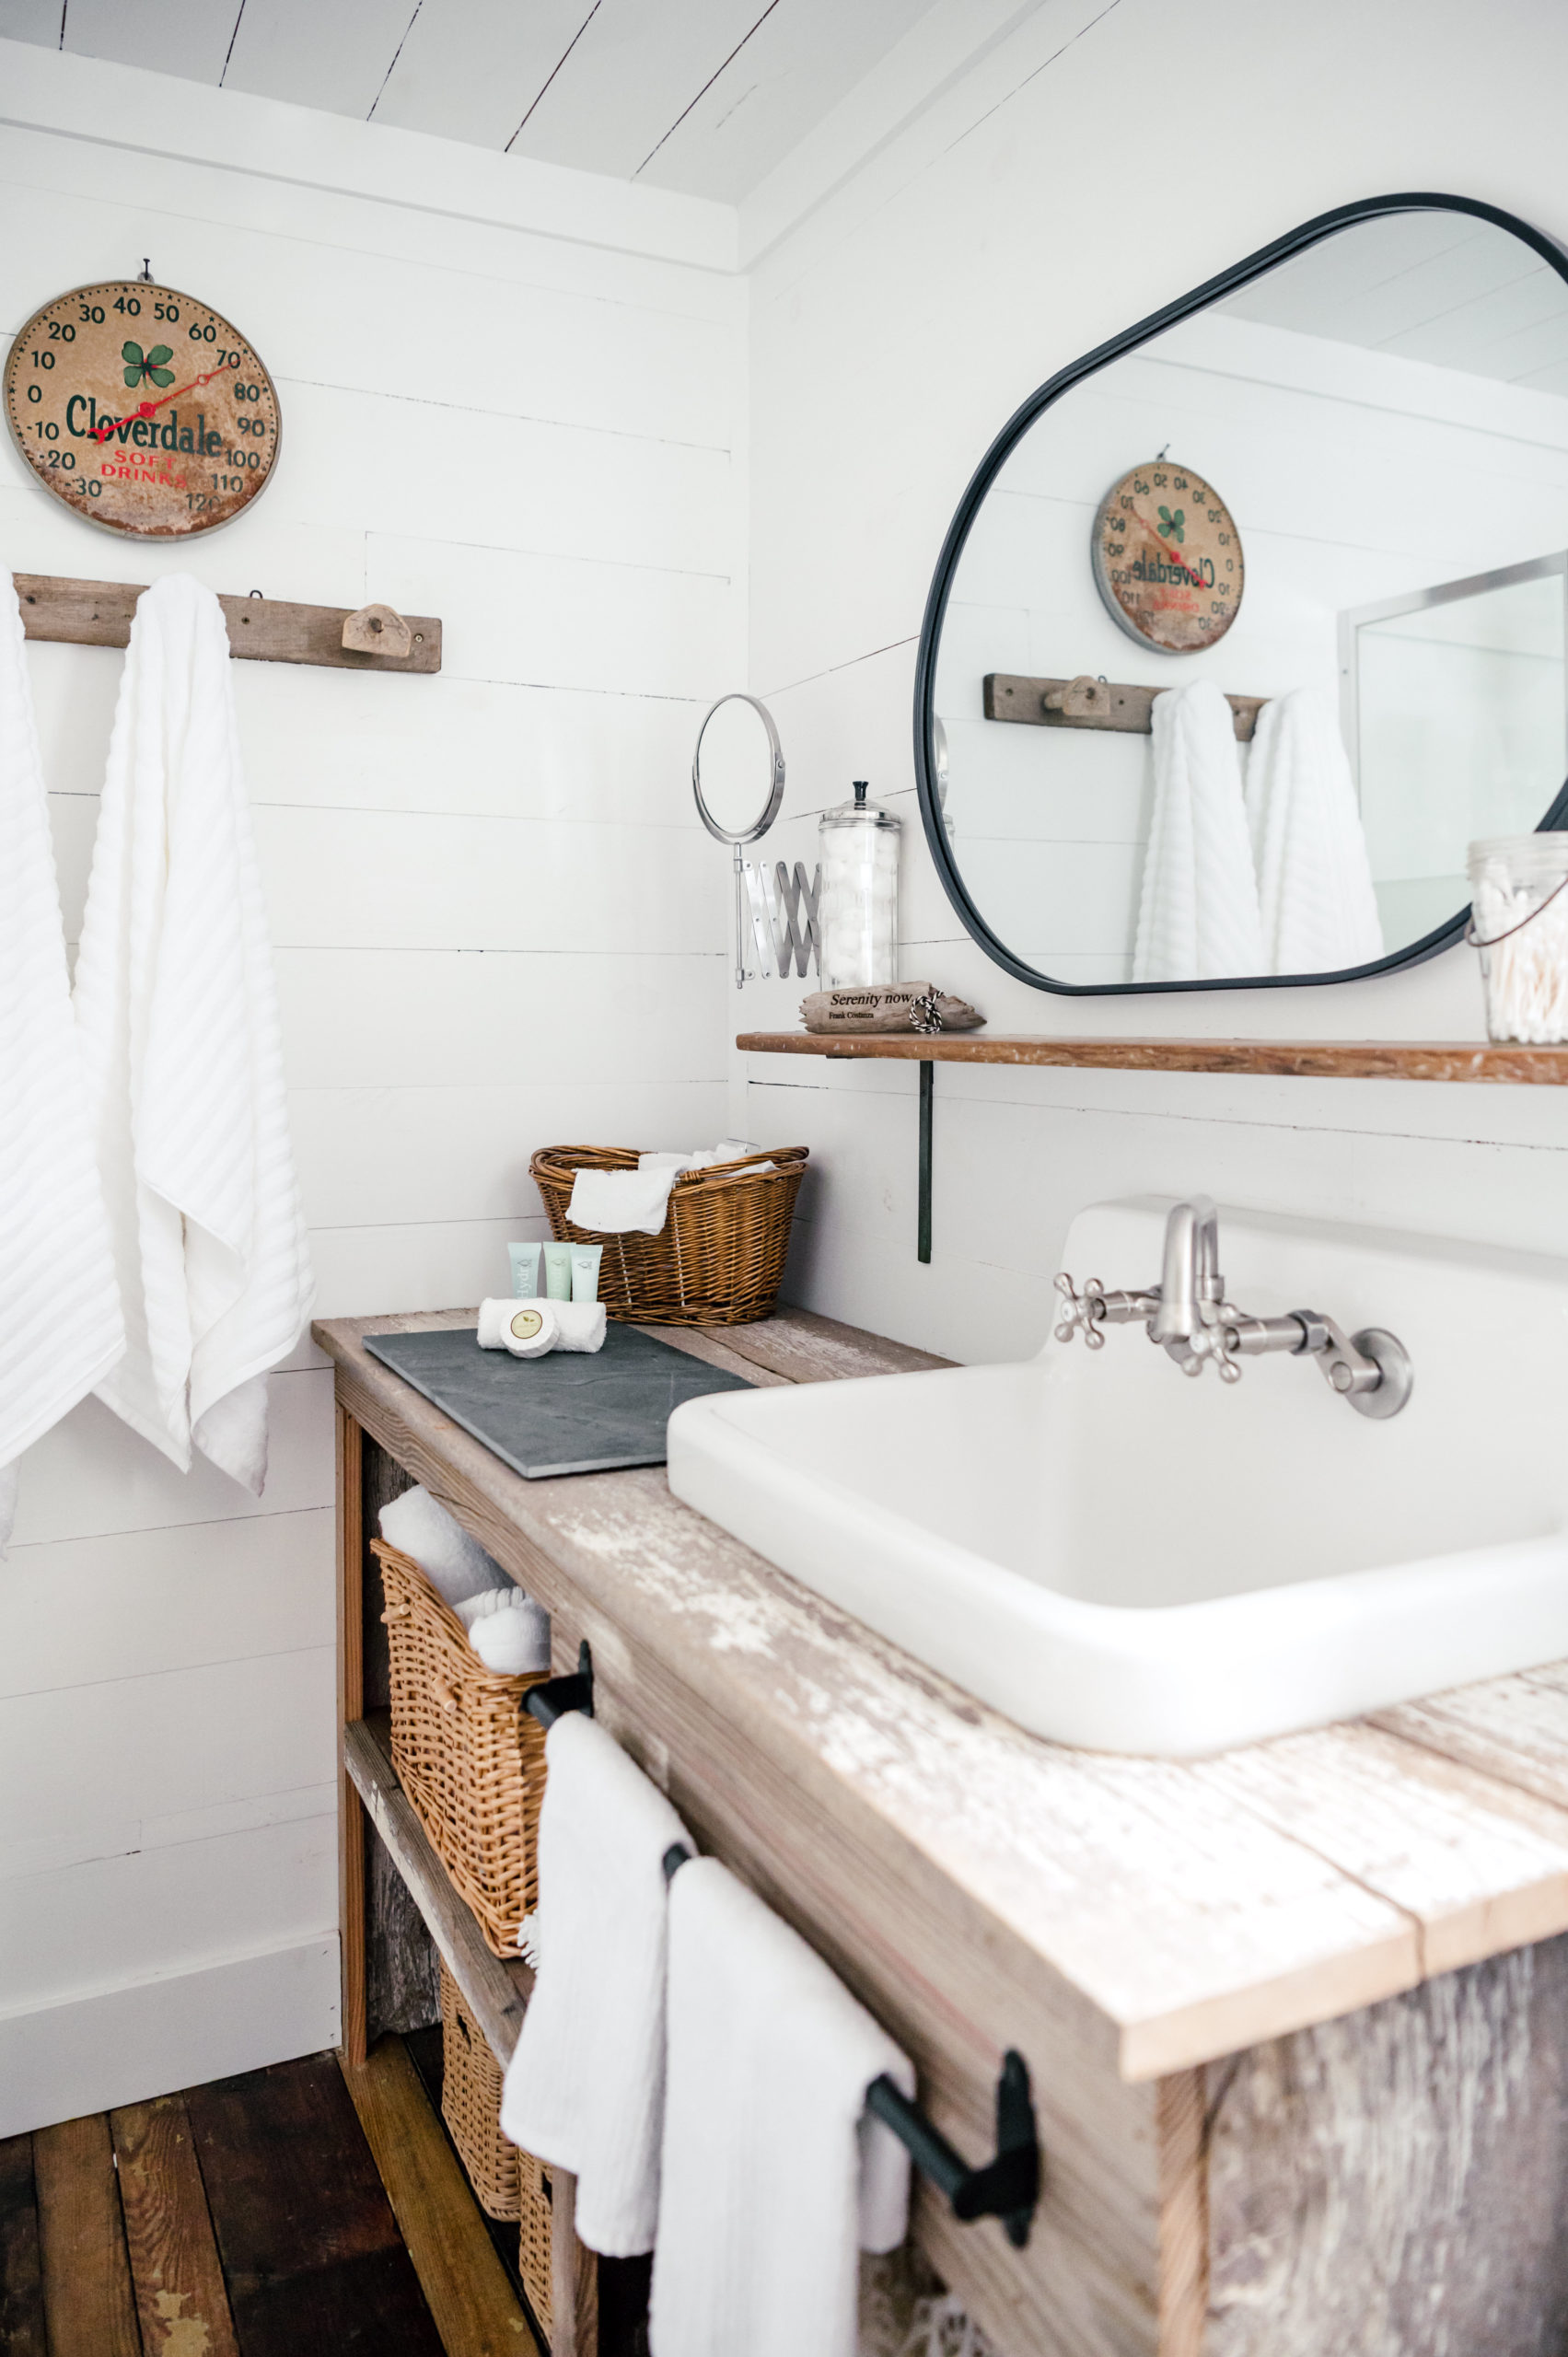 Rustic wooden sink and counter with circular bathroom mirror